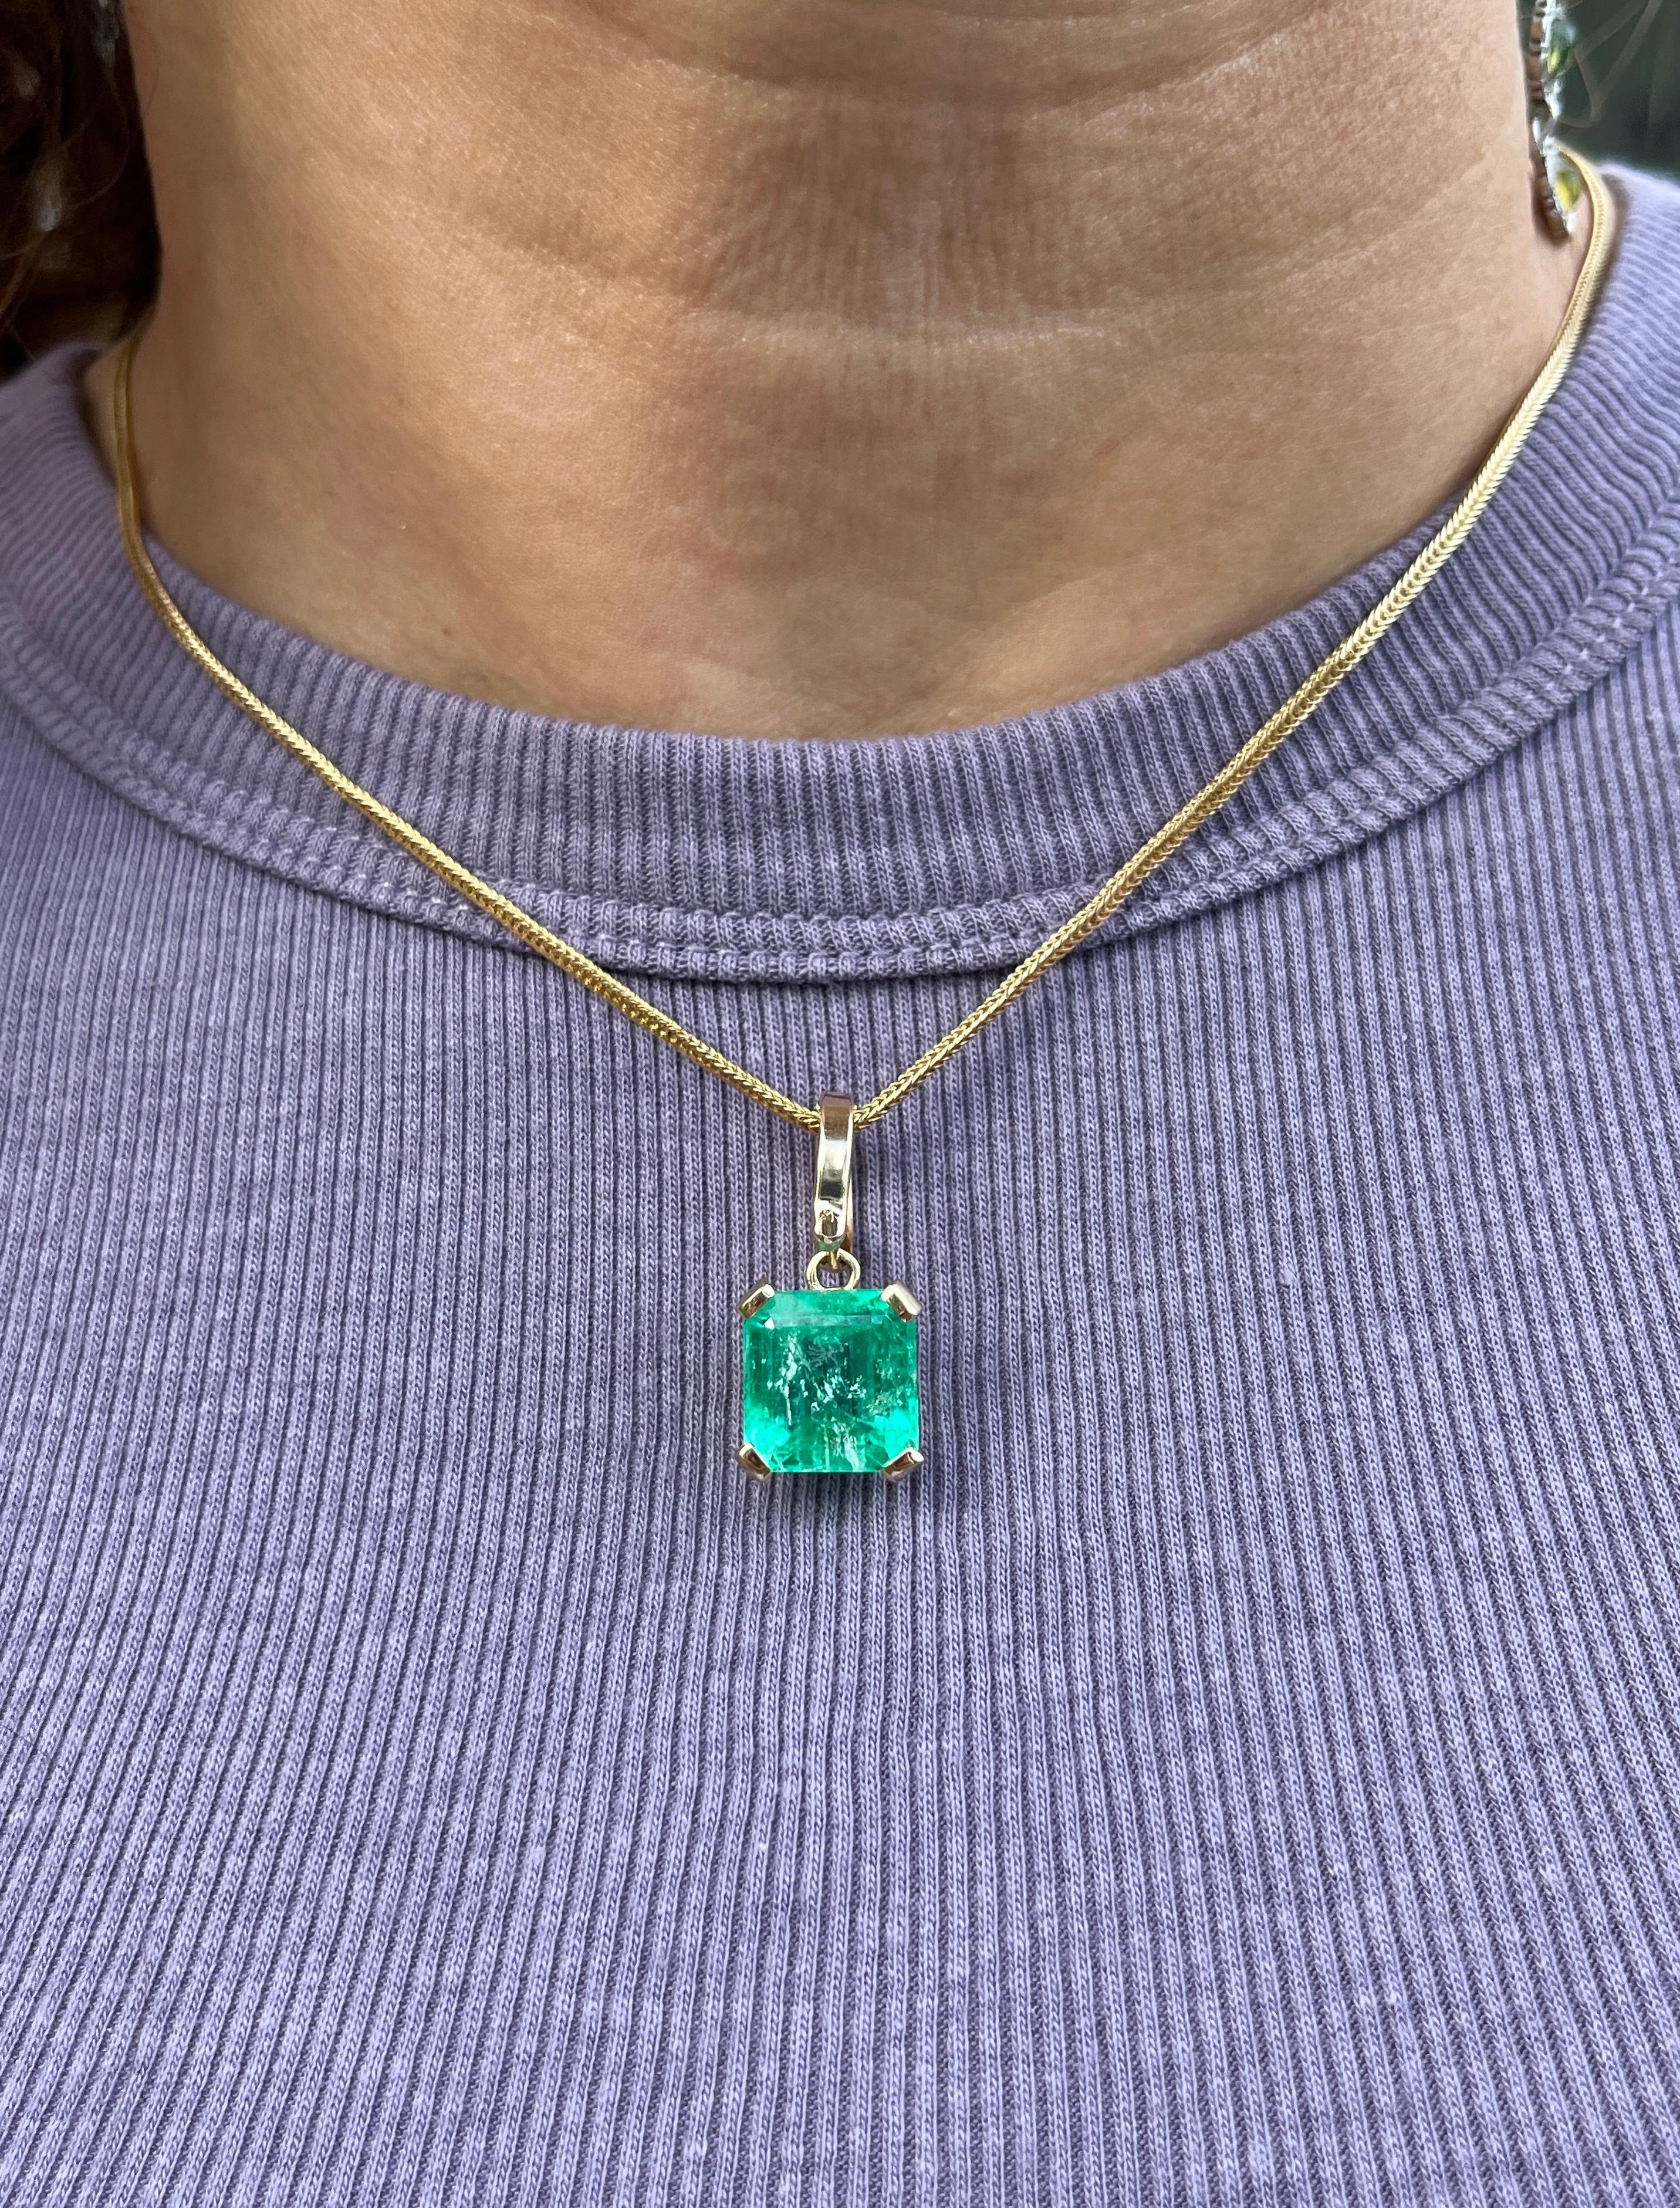 Women's or Men's 8.34 Carat Colombian Emerald Solitaire Pendant Necklace in 14K Gold For Sale